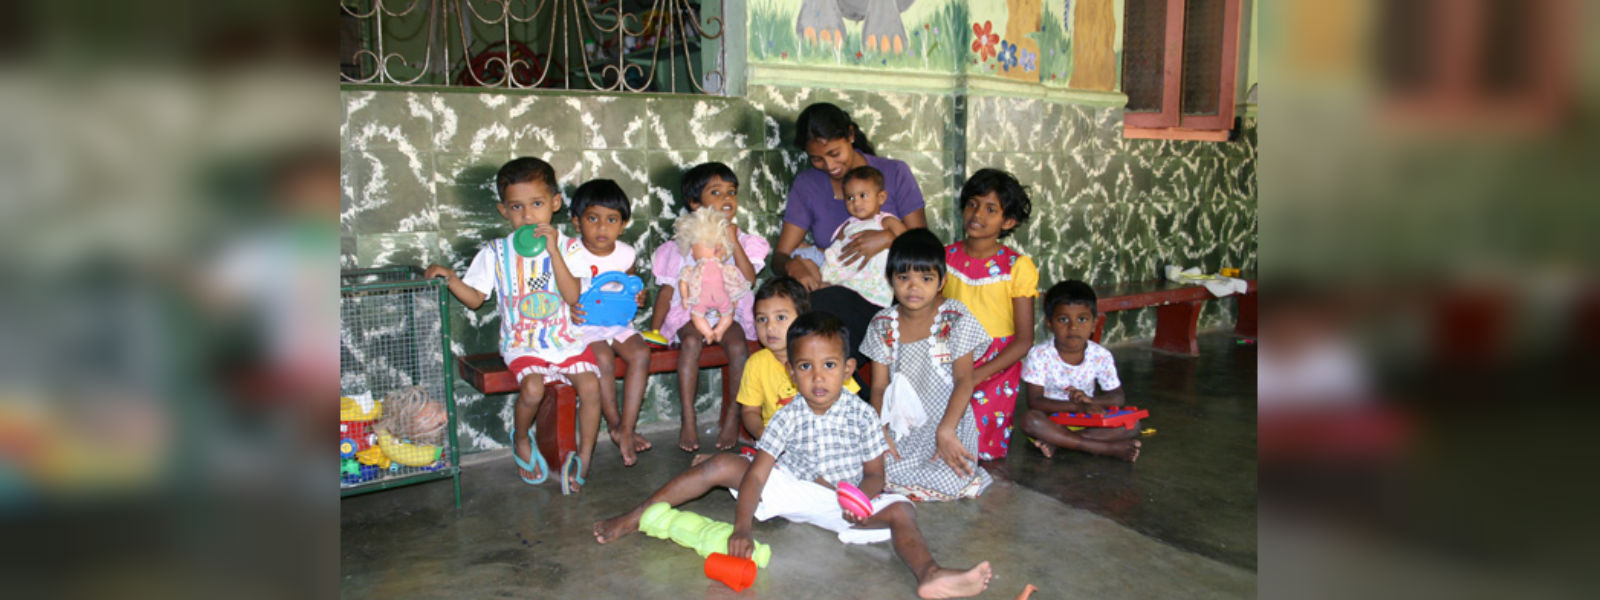 Research to evaluate living conditions of children in orphanages